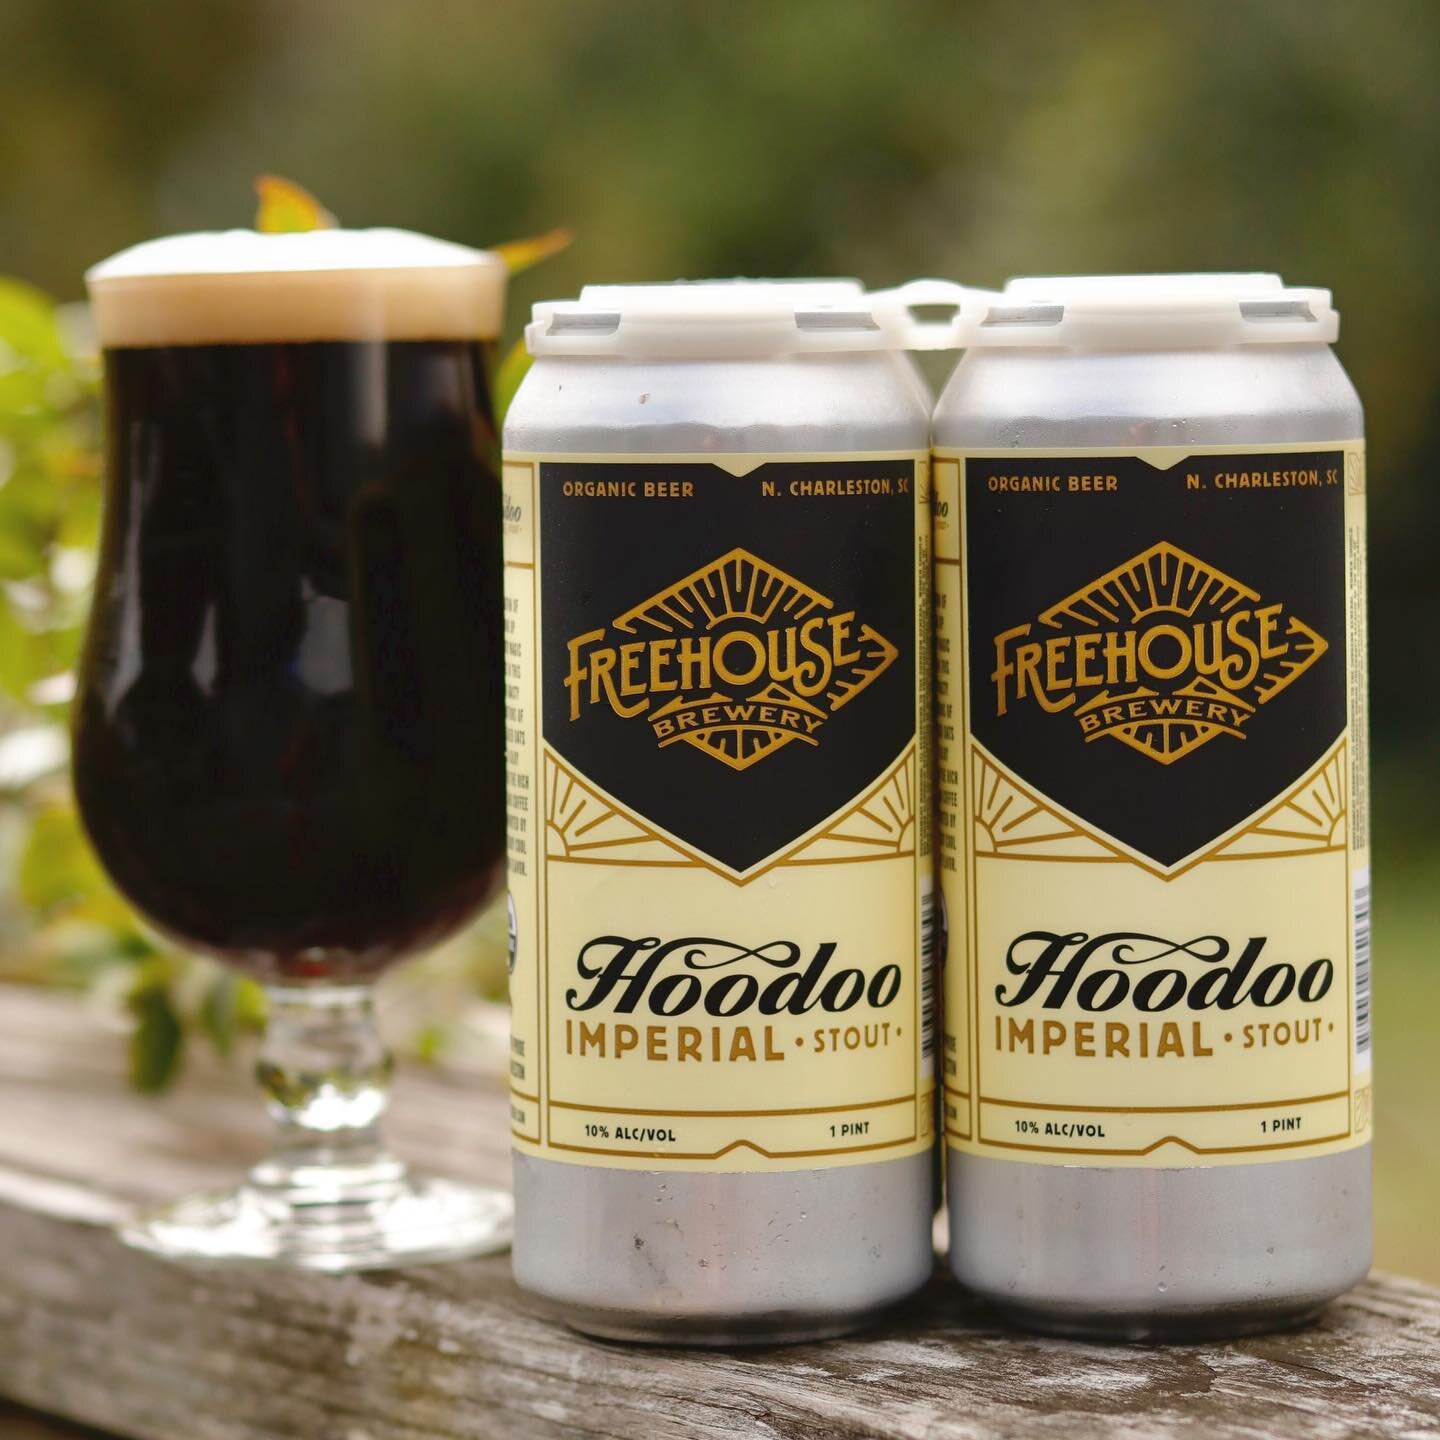 It&rsquo;s a great day for a stout! Stop by the taproom for a pint of our dark and roasty Hoodoo Imperial Stout. 😋 Available on draft and in 4-packs to-go!

#OrganicBeer #TheNaturalChoice #FreehouseBeerCHS #Stout #Hoodoo #ImperialStout #SCBeer #CHSB